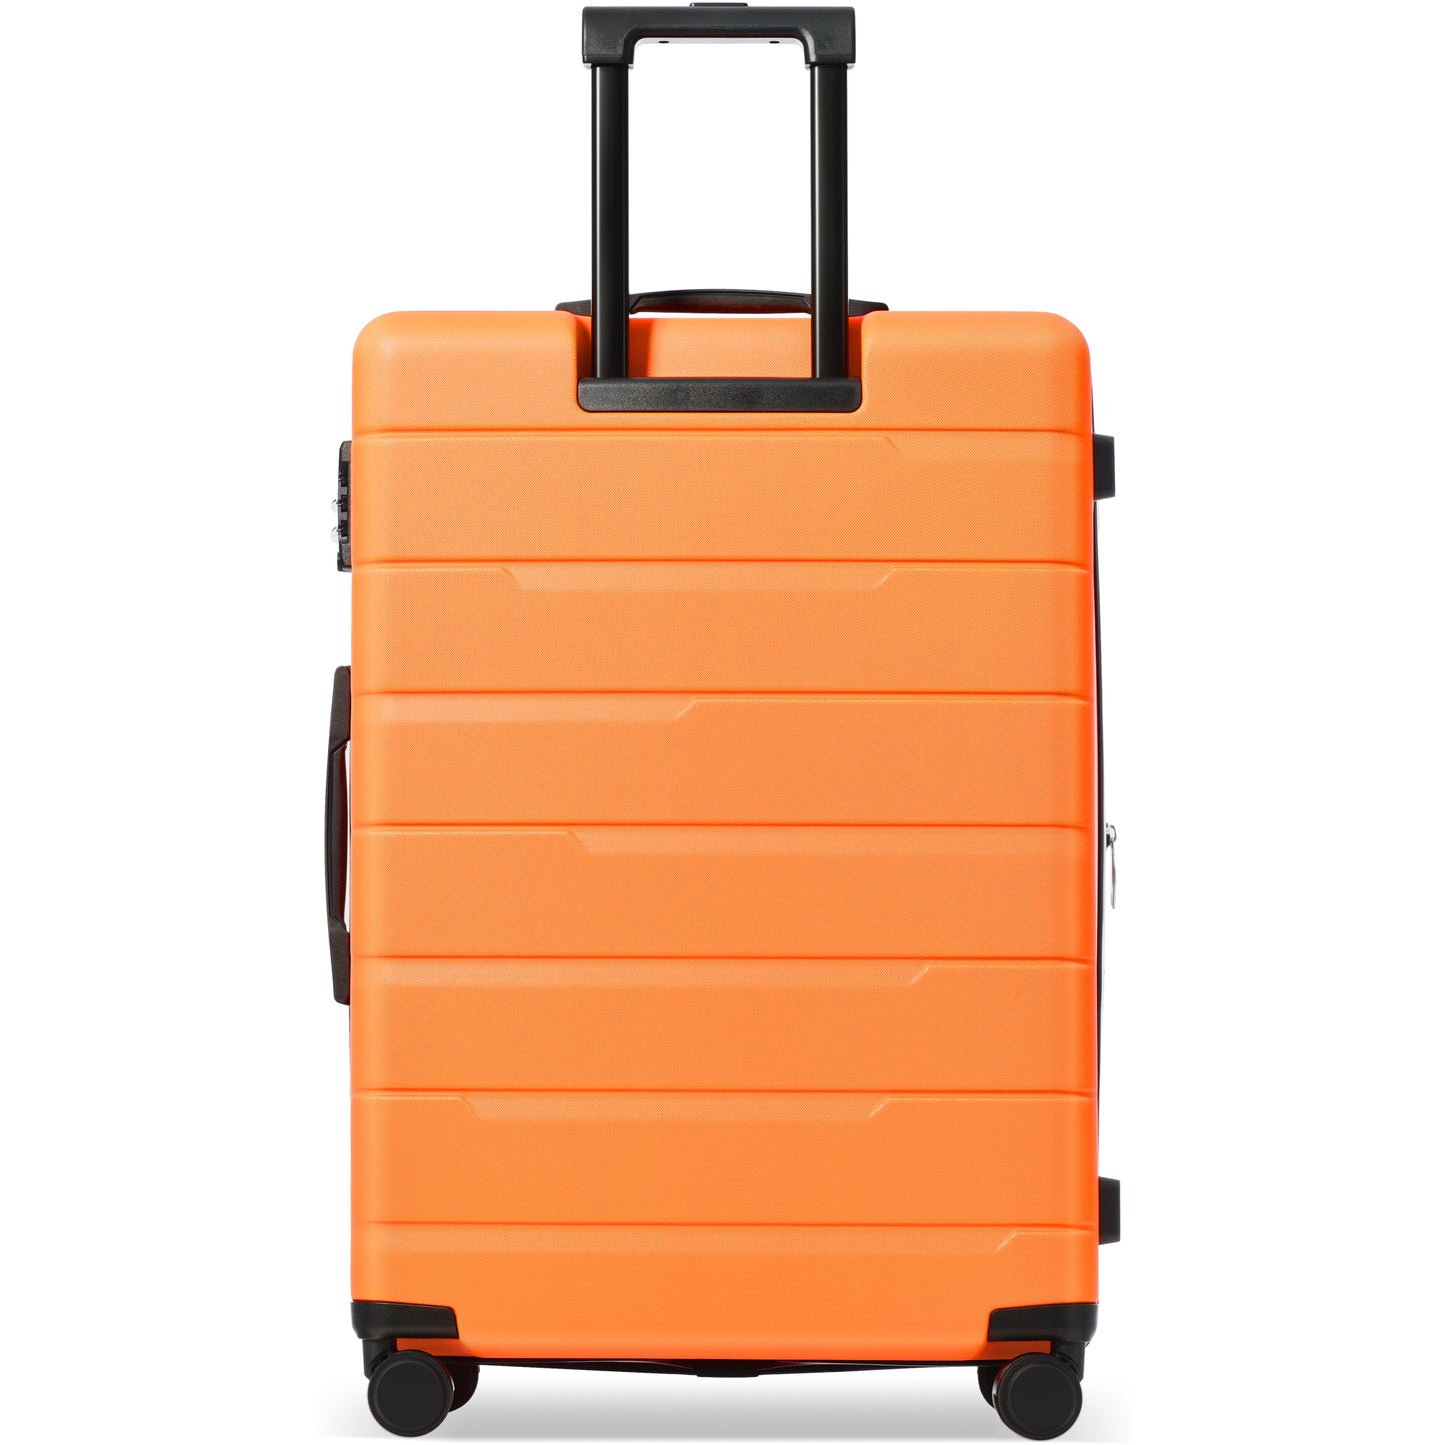 Orange Luggage Sets 3 Piece Suitcase Set 20/24/28,Carry on Luggage Airline Approved